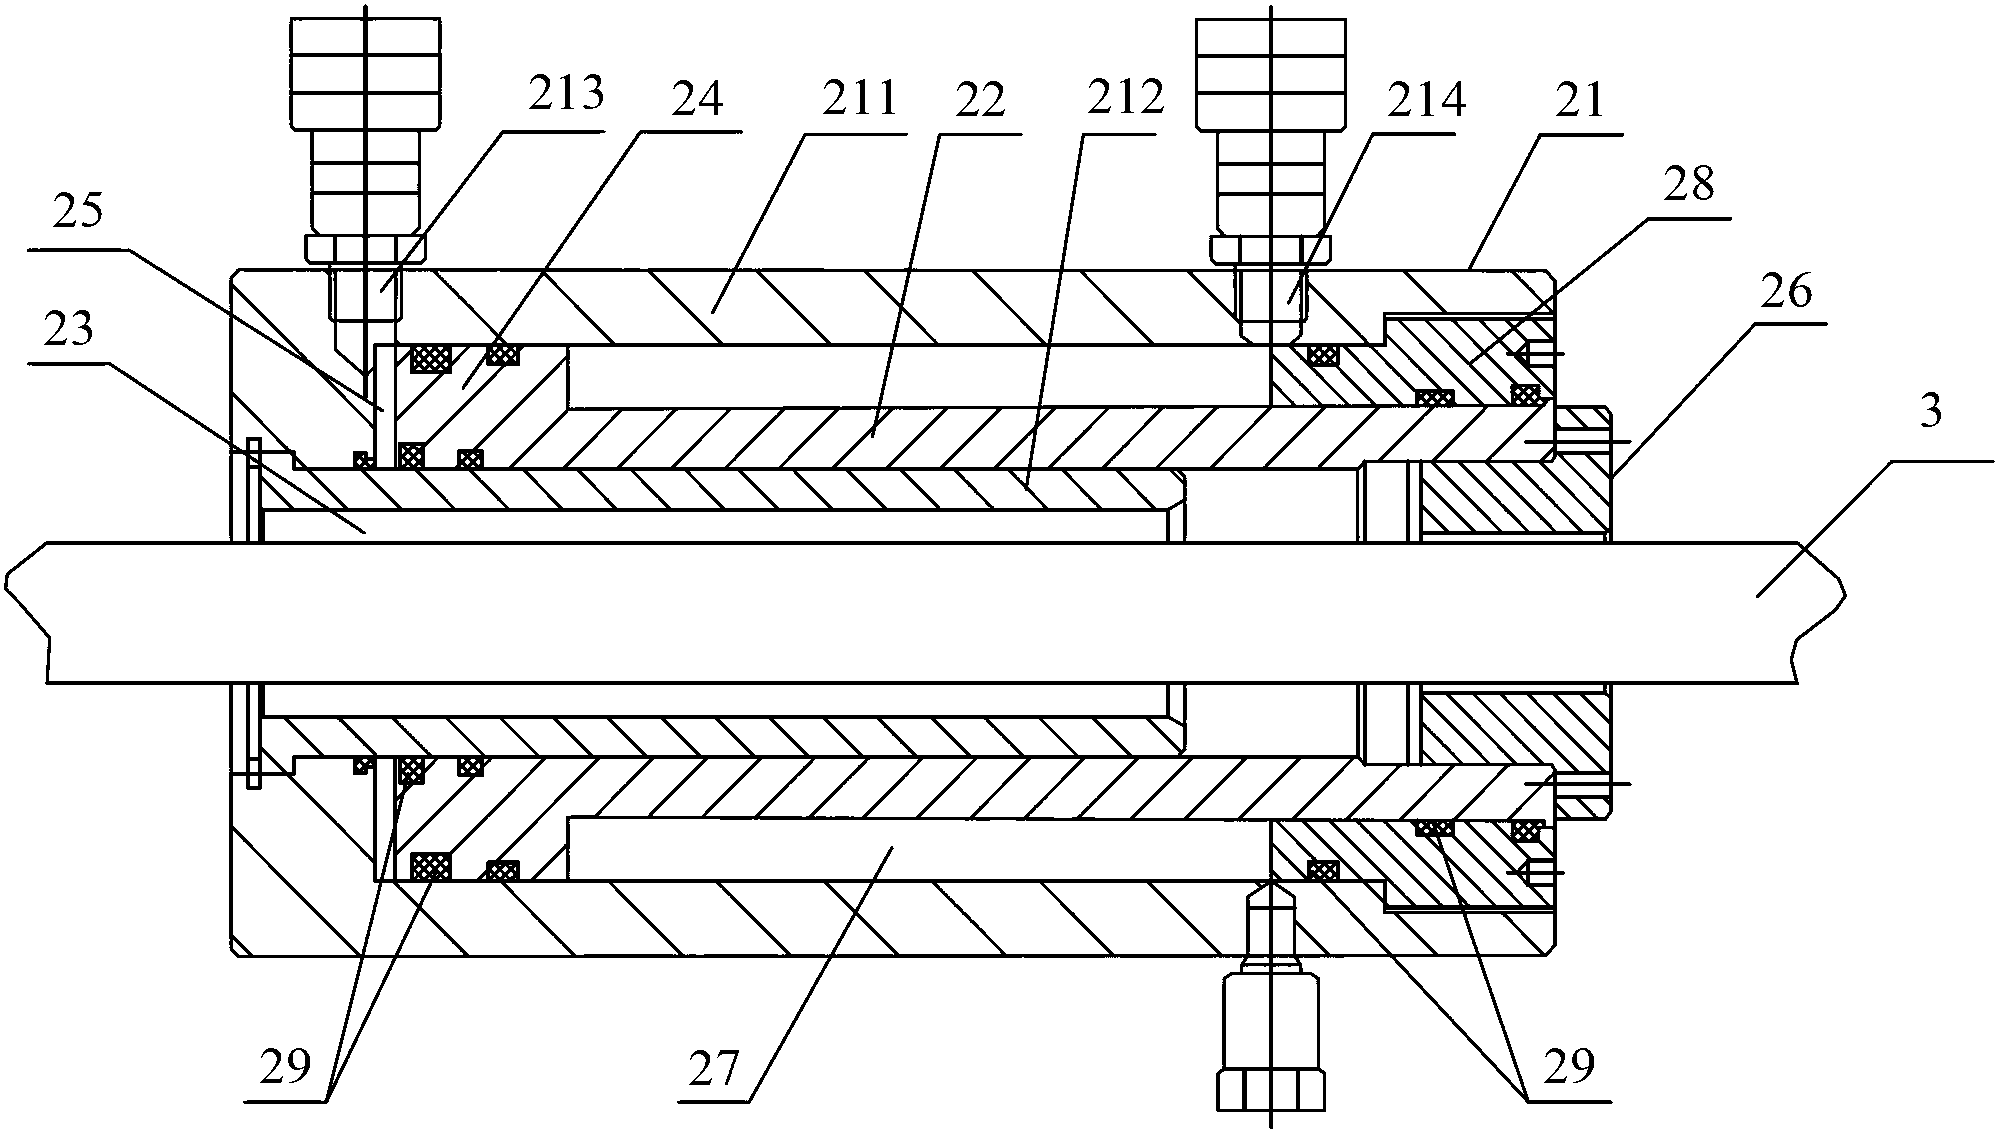 Interference assembling tool for cylindrical part